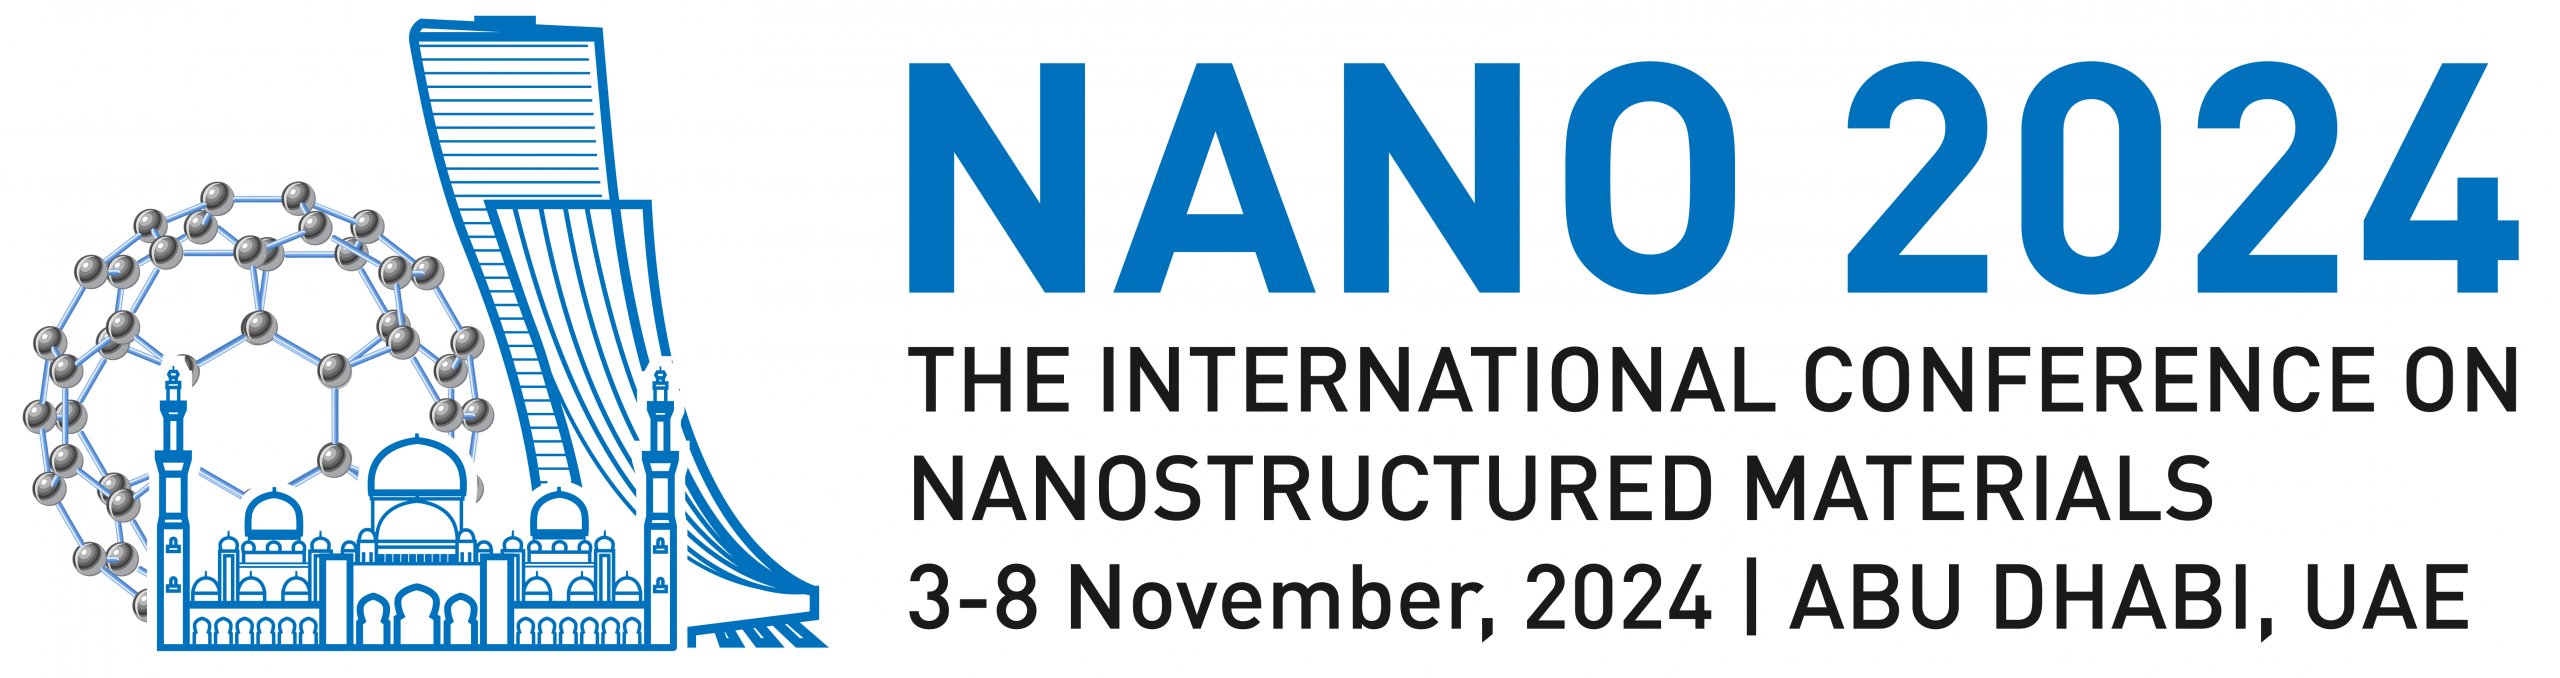 The 17th International Conference on Nanostructured Materials